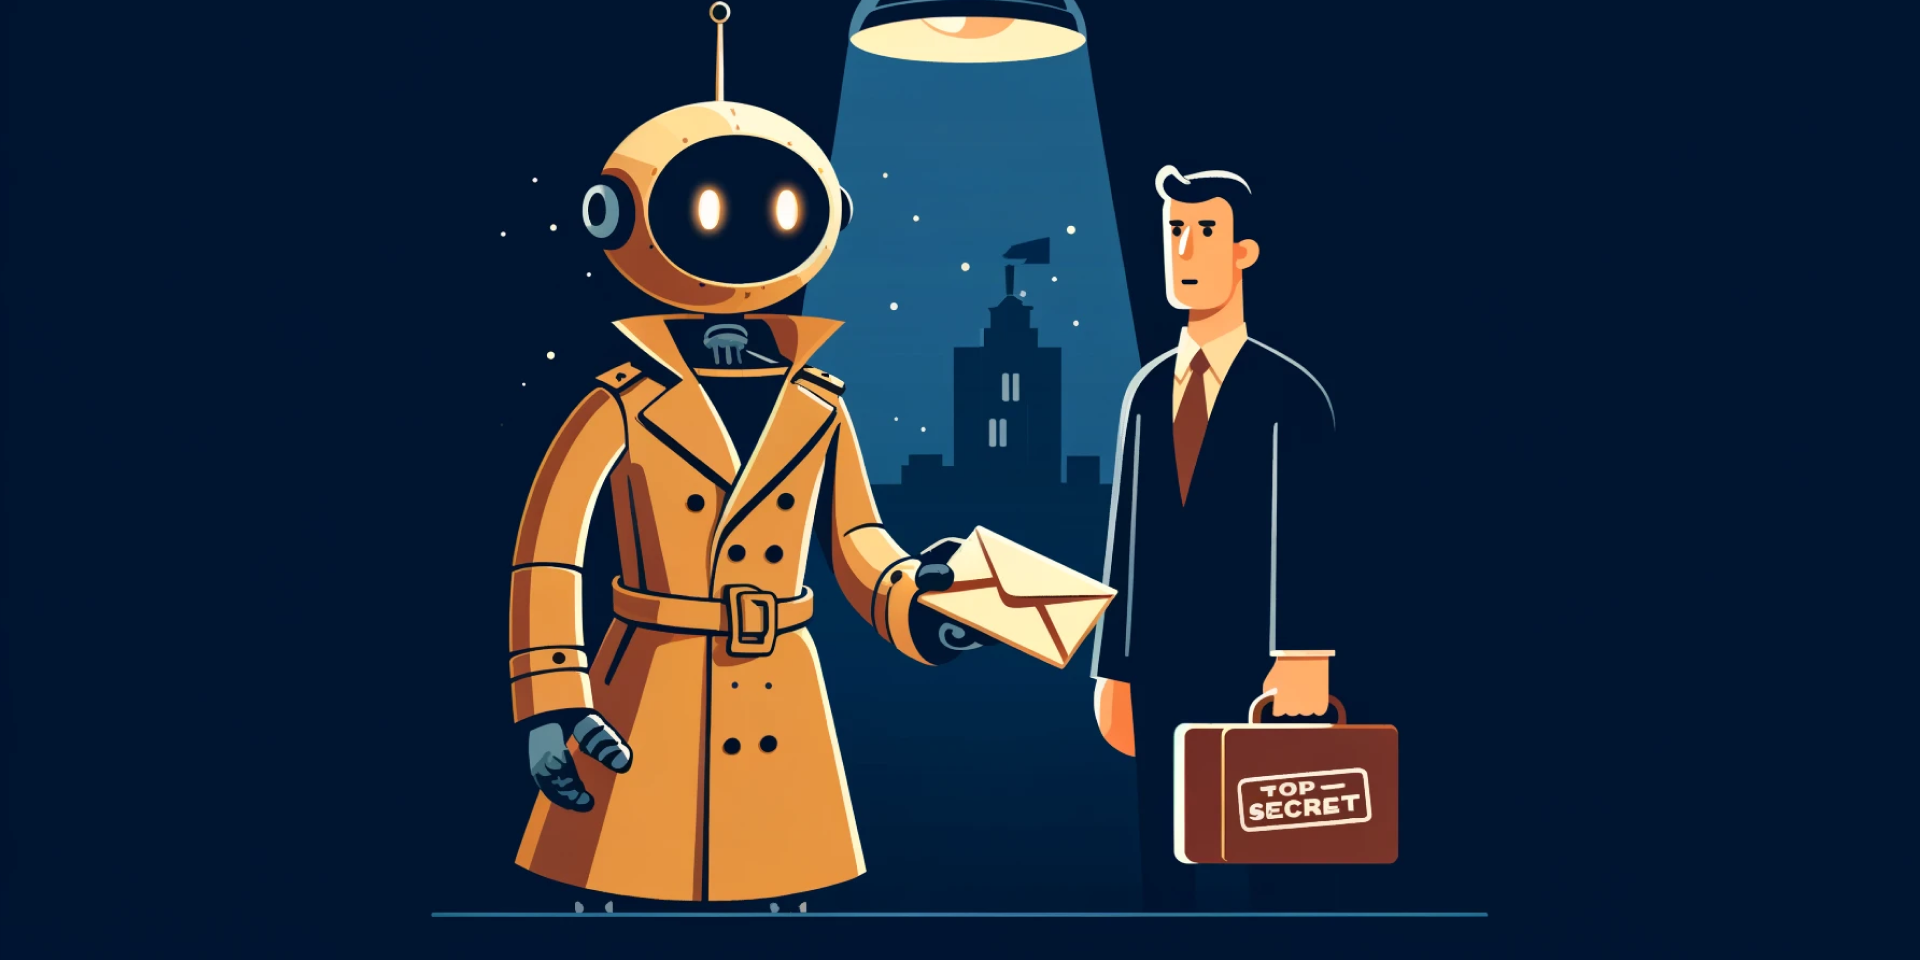 A trenchcoat-wearing robot handing an envelope to a business man.